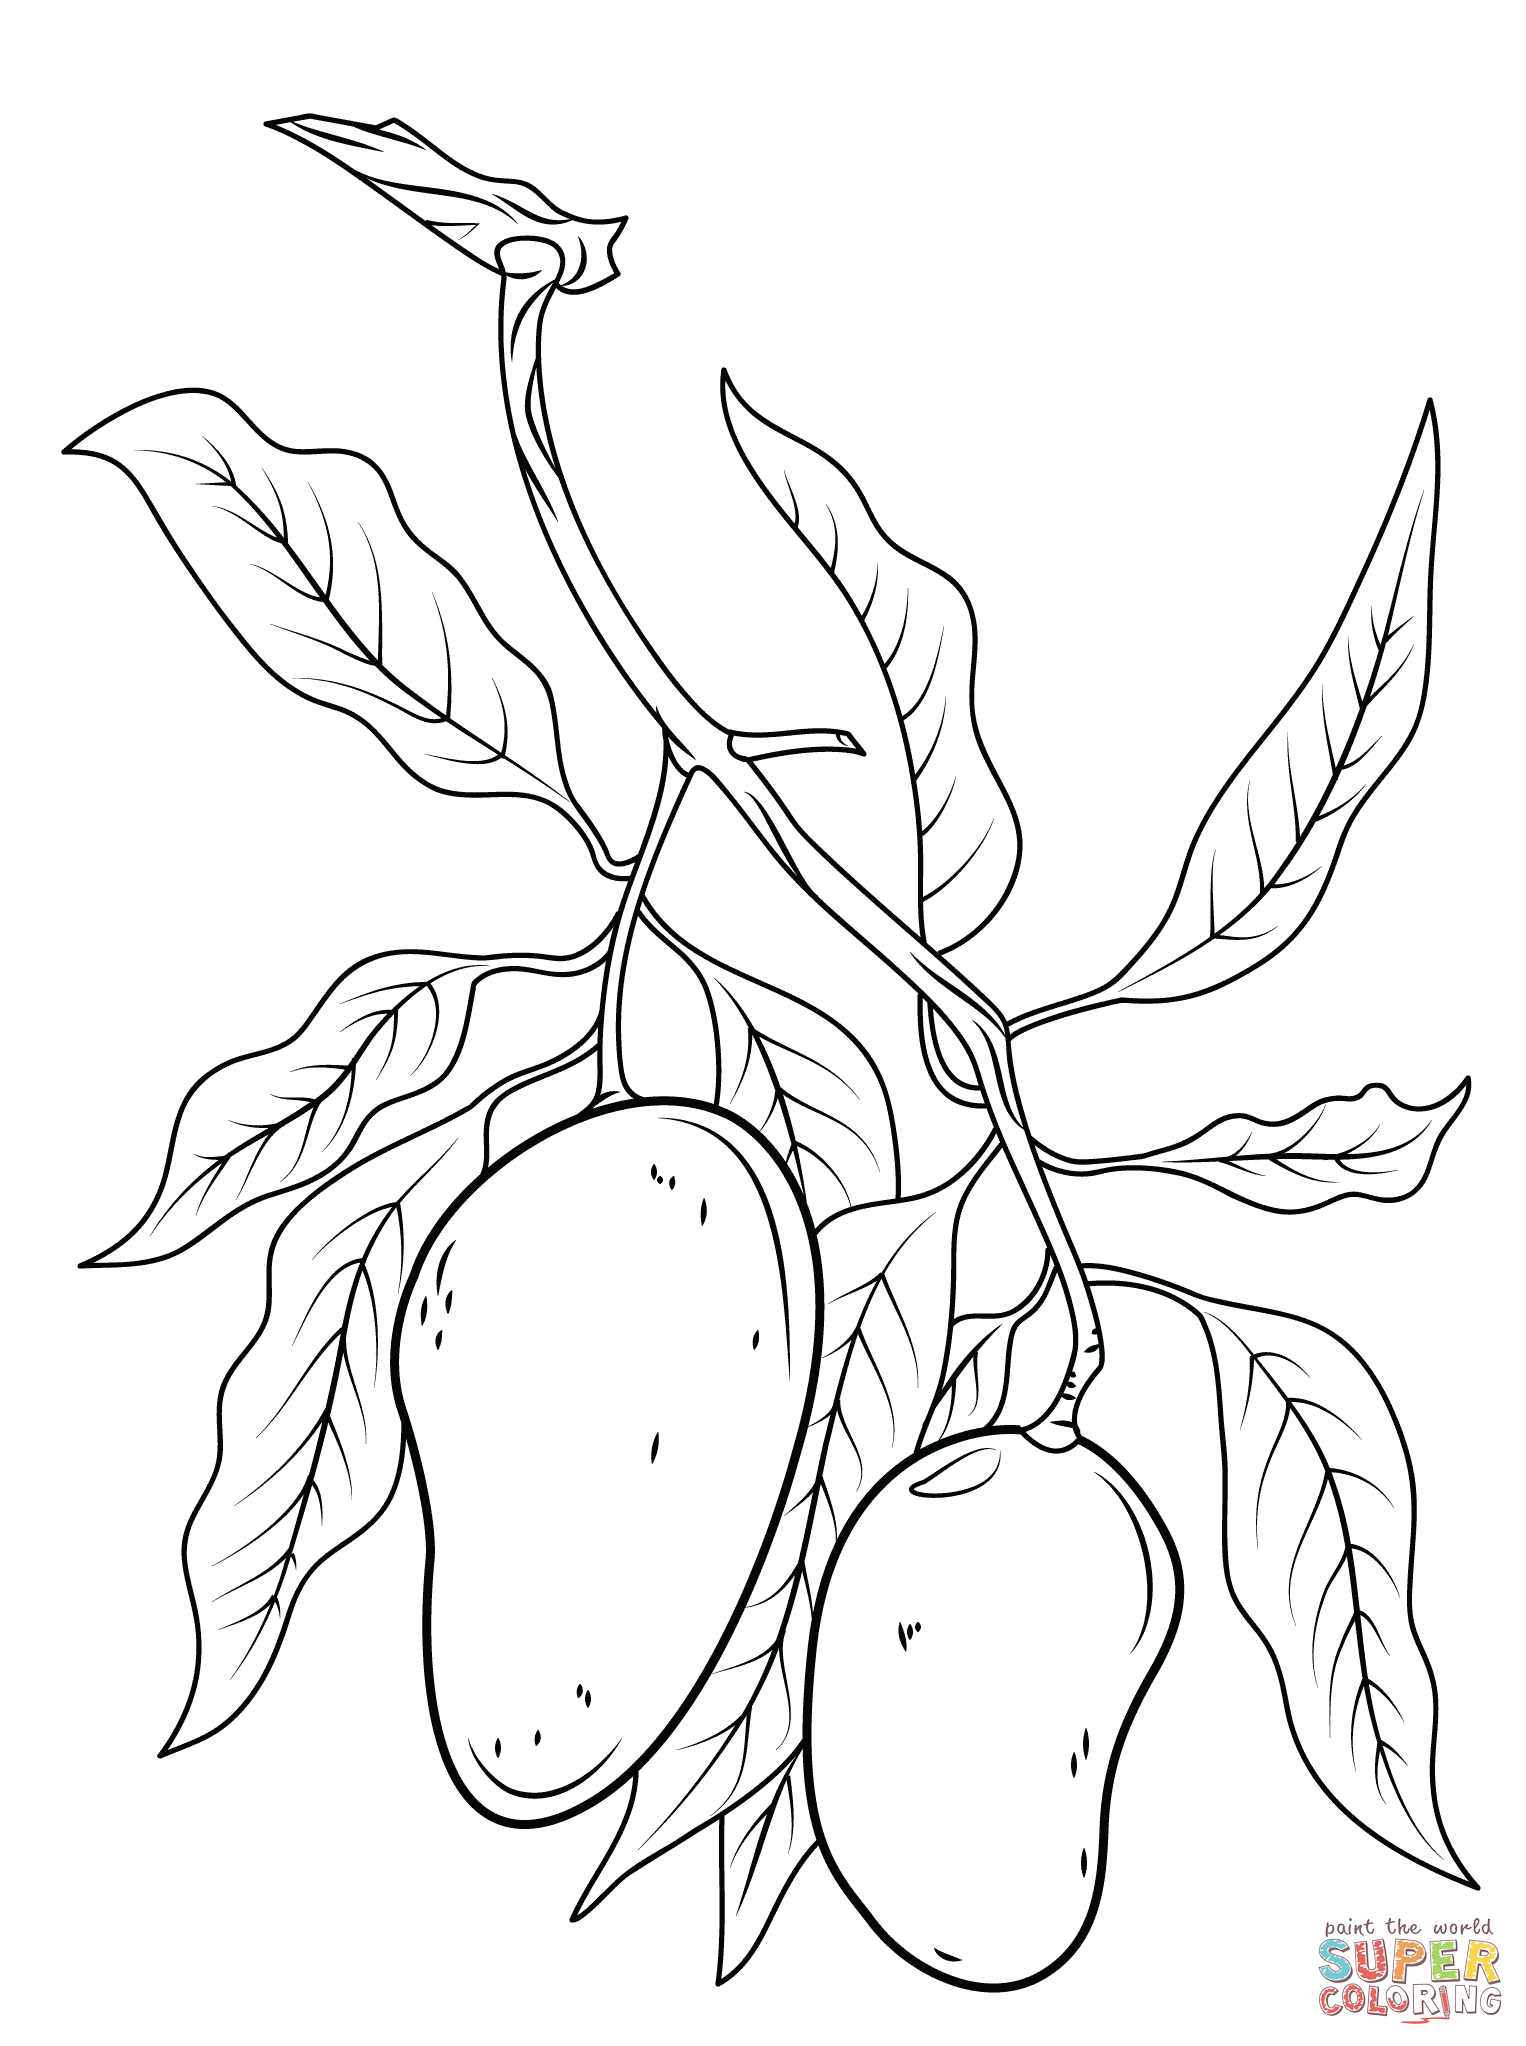 Mango Branch | Super Coloring | Tree coloring page, Coloring pages